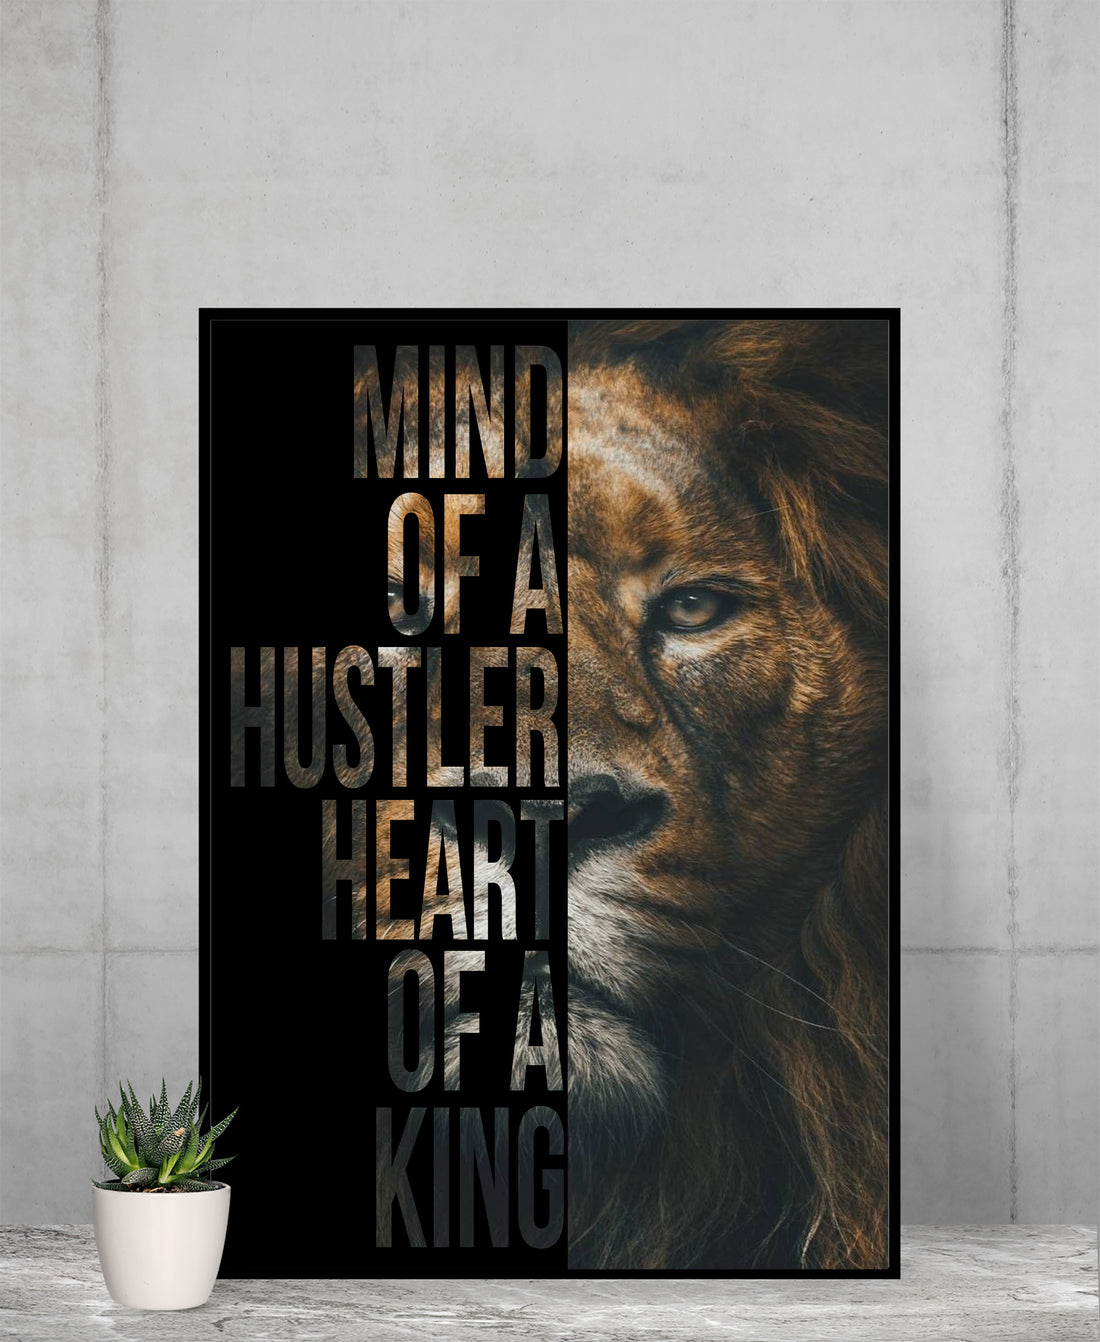 Poster Wall, Mind Of A Hustler Heart Of A Queen Poster, Lion King Quotes, Birthday Gifts For Boyfriend, Living Room Decorations